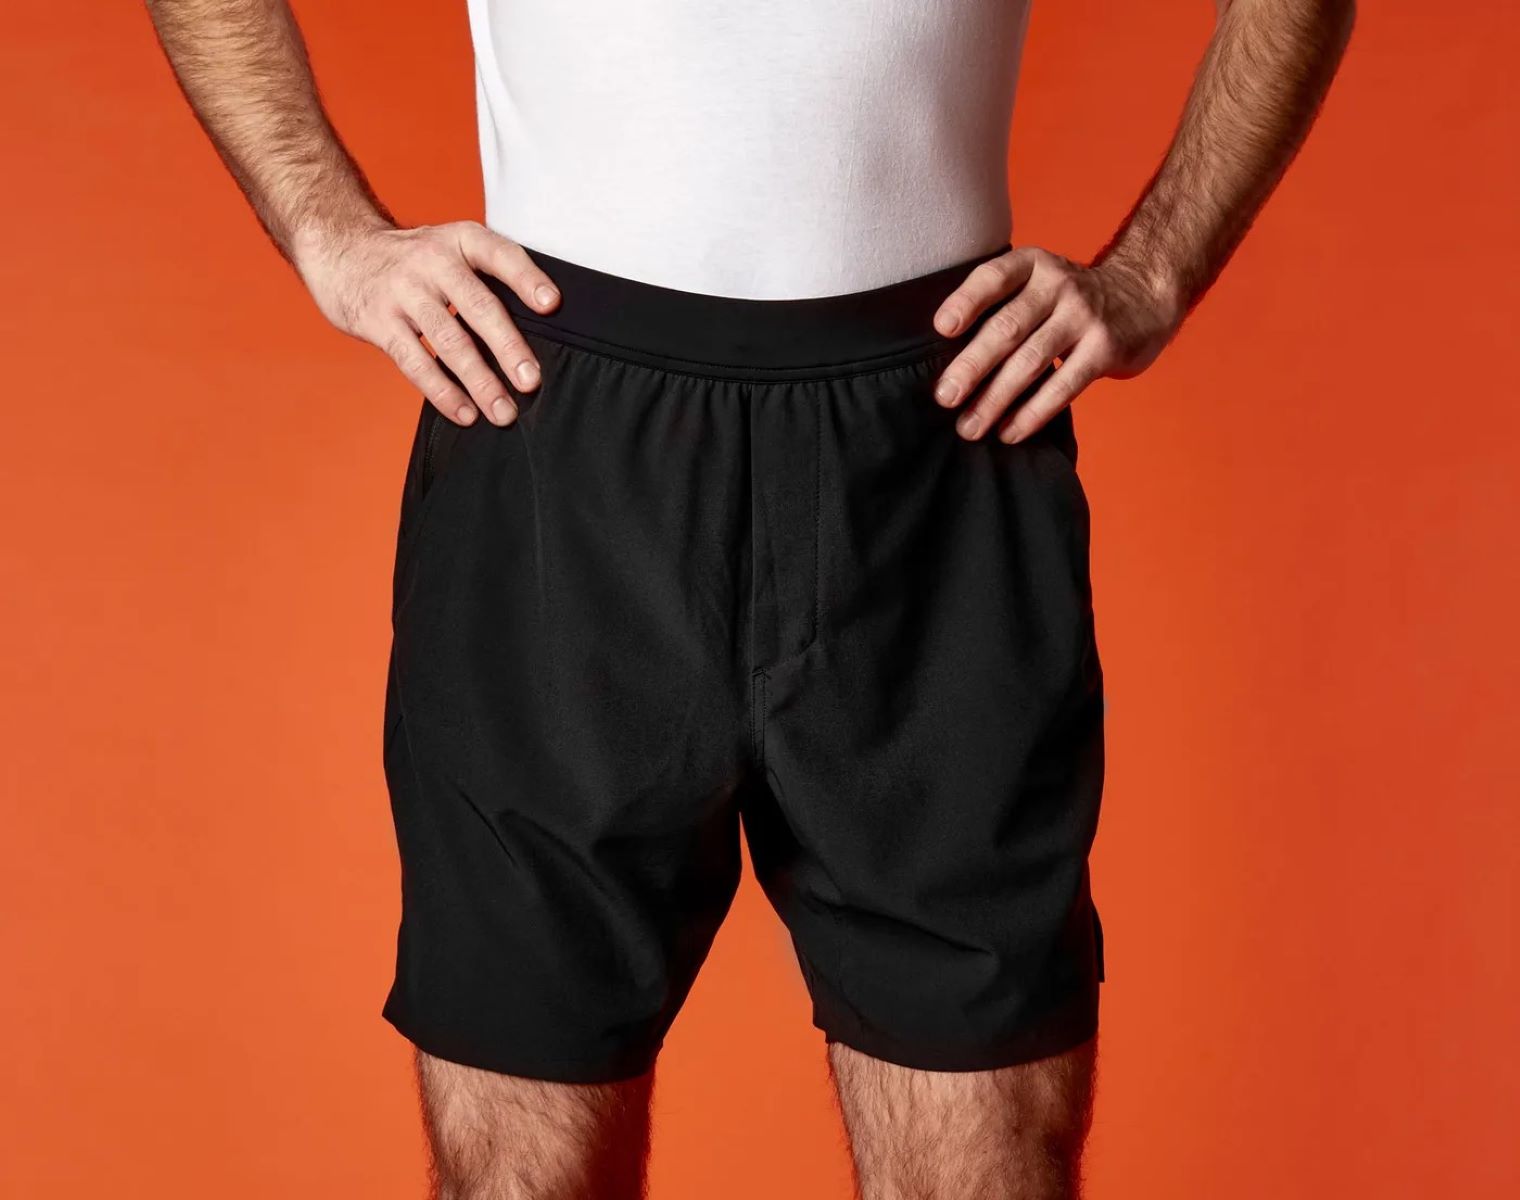 Athletes' Ultimate Choice: Spandex Or Cotton For Workout Shorts? Find Out Now!